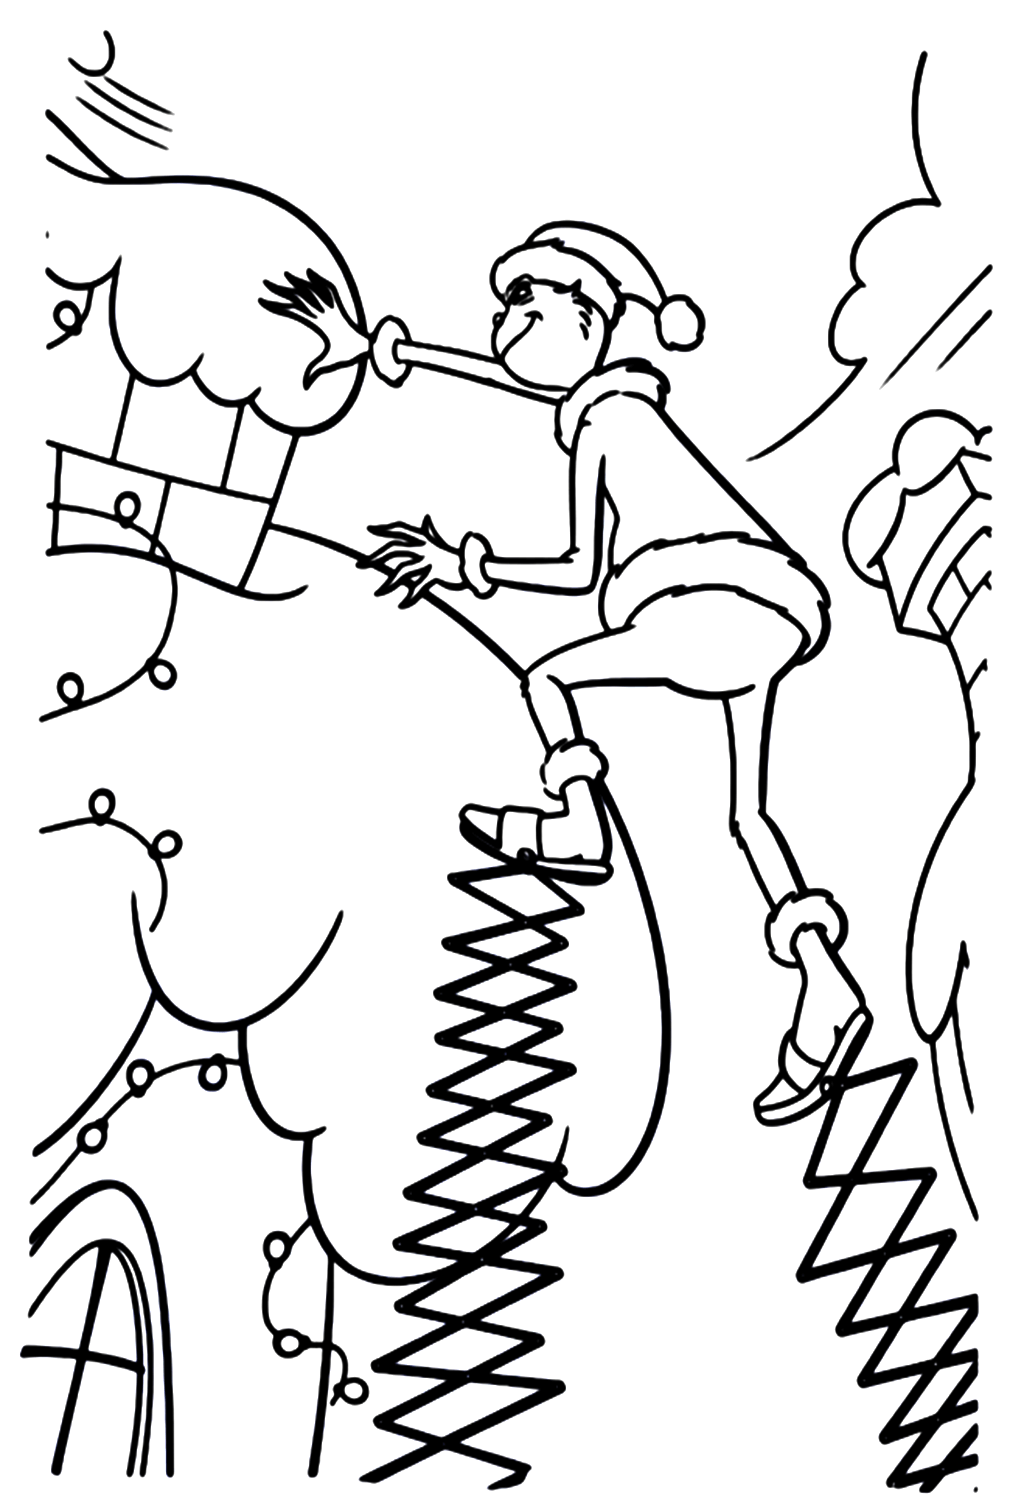 Grinch Coloring Pages For Adults - Grinch Coloring Pages - Coloring